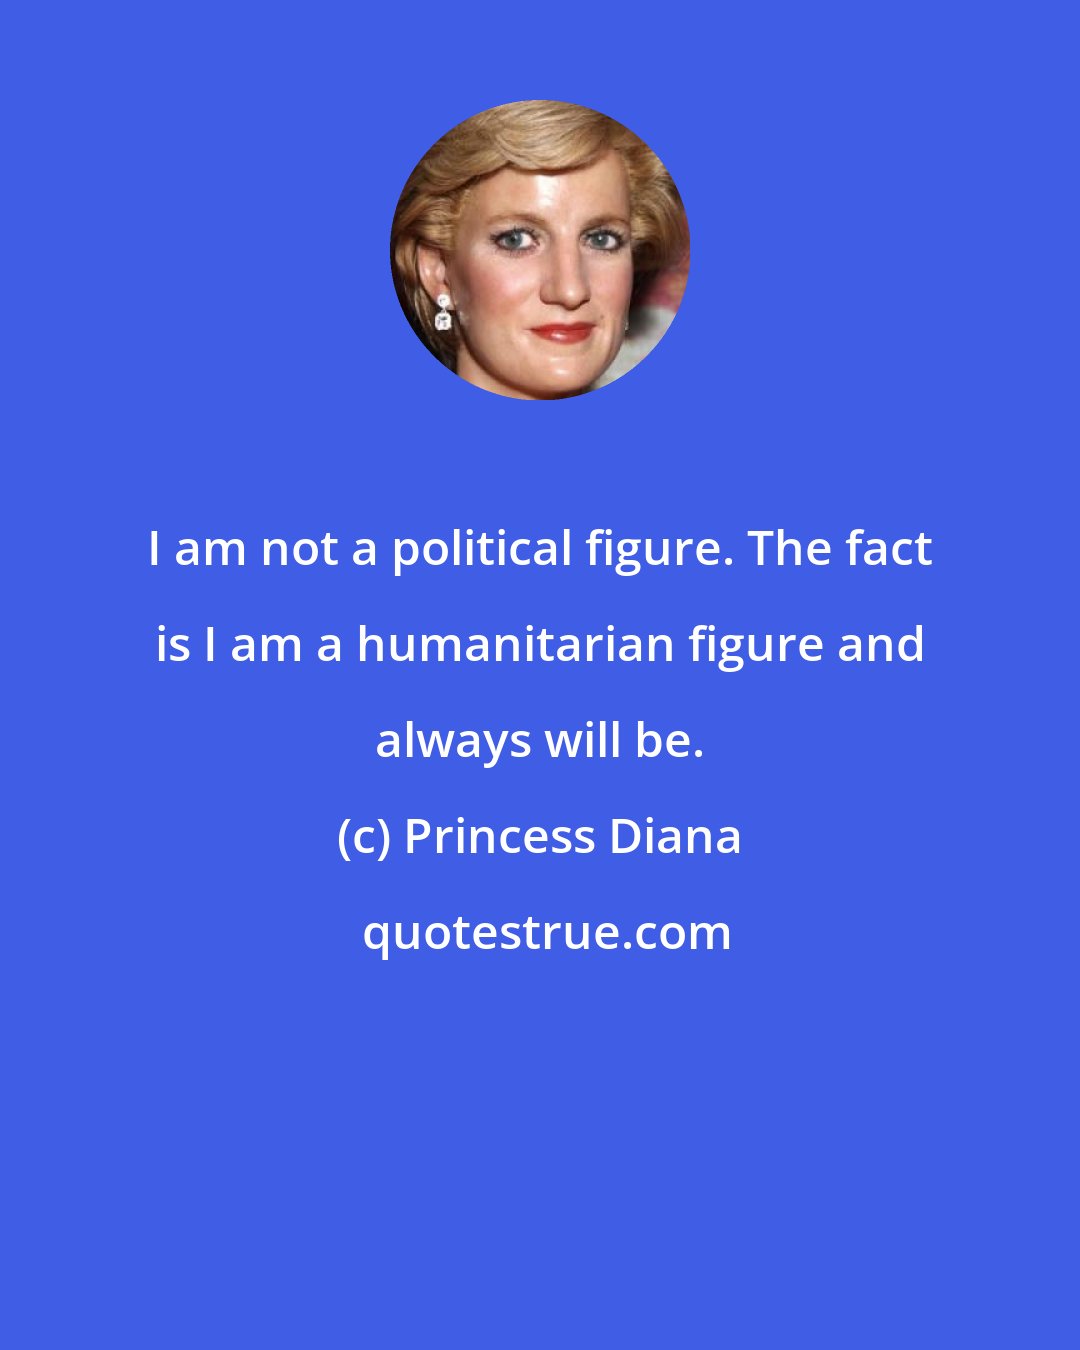 Princess Diana: I am not a political figure. The fact is I am a humanitarian figure and always will be.